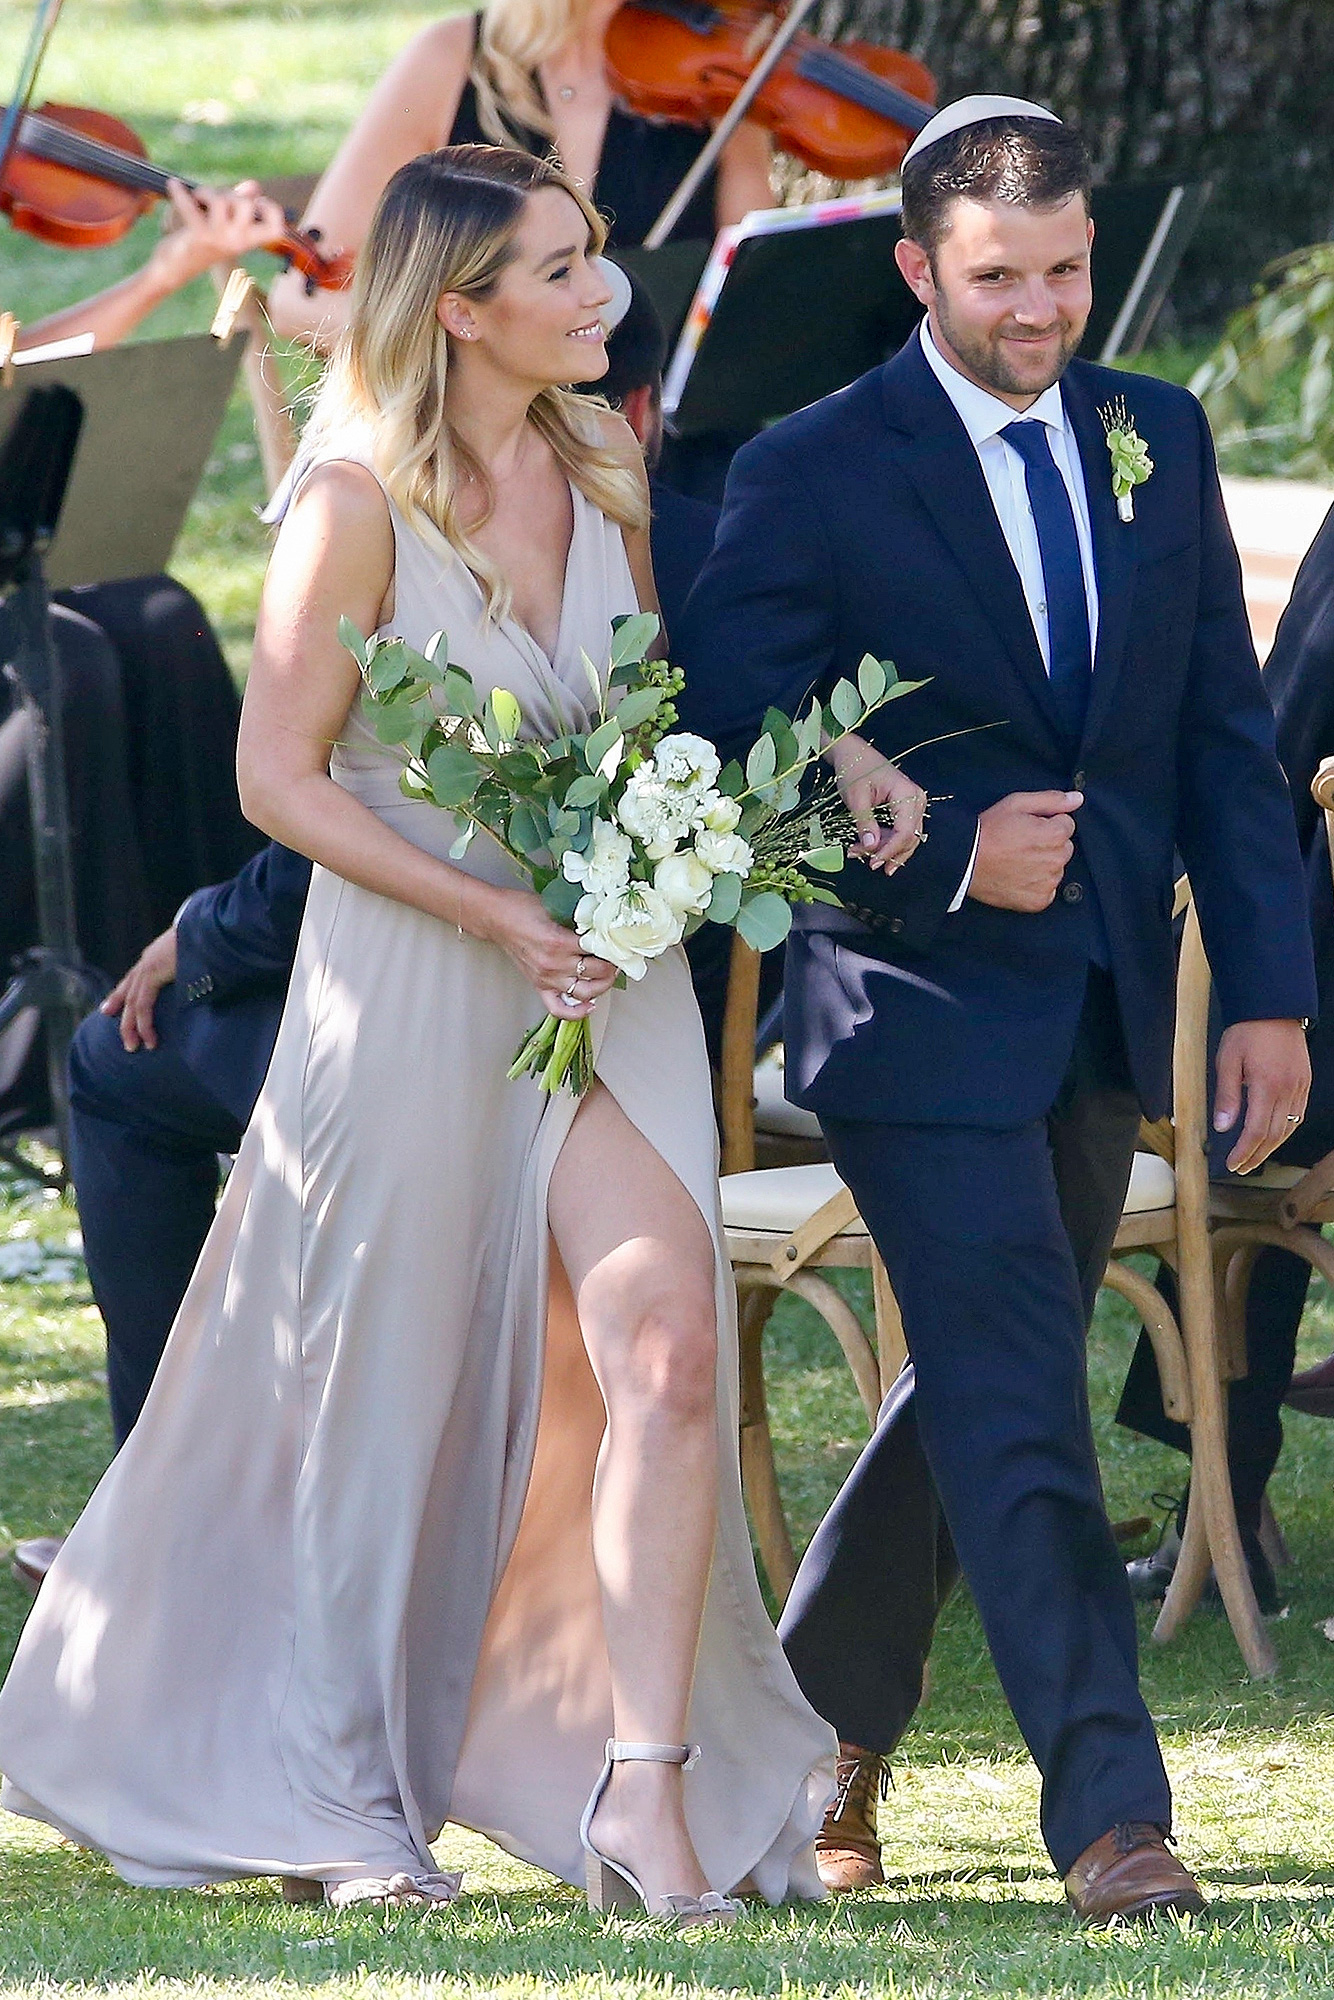 Lauren Conrad Is a Beautiful Bridesmaid Six Weeks After Giving